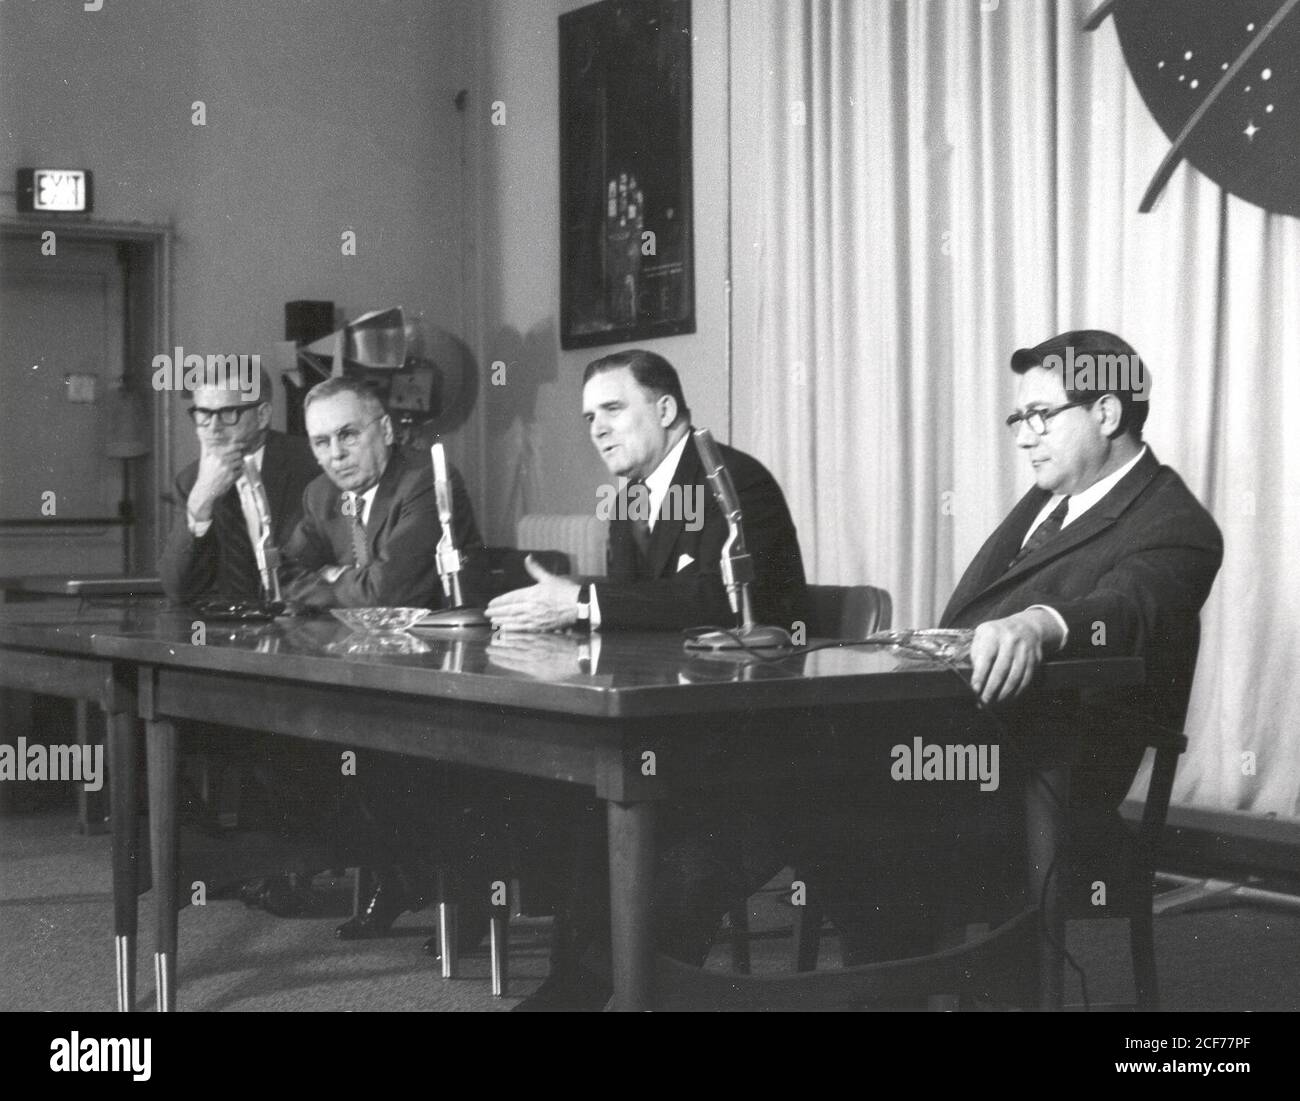 After the successful spaceflight of Yuri Gagarin, the first person to fly in space, as well as orbit Earth, NASA held a press conference at NASA Headquarters in Washington, DC to respond to questions concerning Gagarin's flight and the status of the American space program. From left to right: Dr. Robert C. Seamans Jr., Associate Administrator; Dr. Hugh L. Dryden, Deputy Administrator; Mr. James E. Webb, Administrator; and Dr. Abe Silverstein, Director of Space Flight Programs. Stock Photo